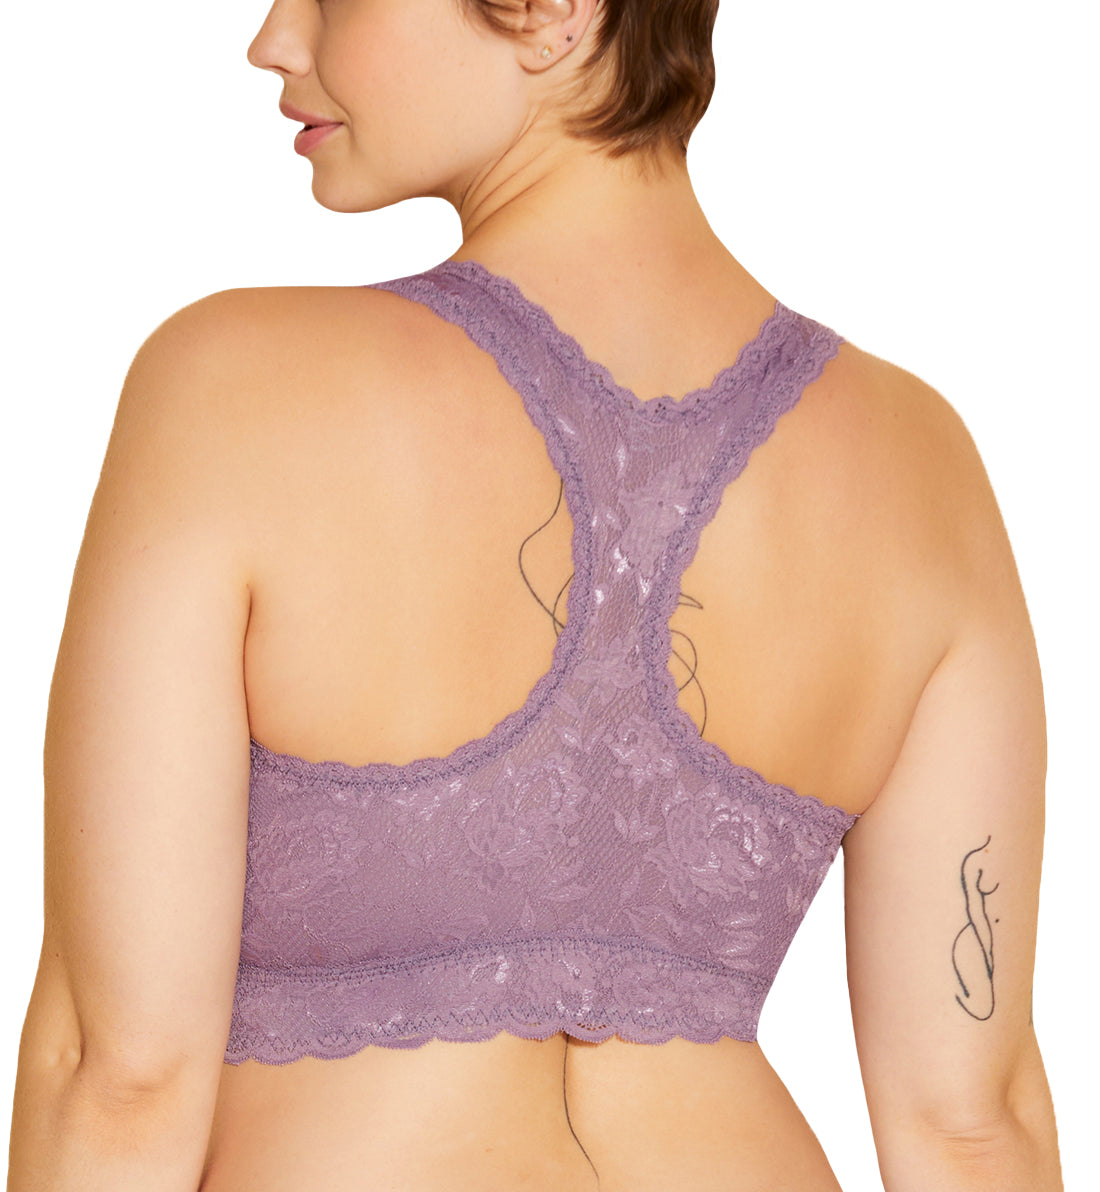 Breakout Bras - Did you know that Cosabella means